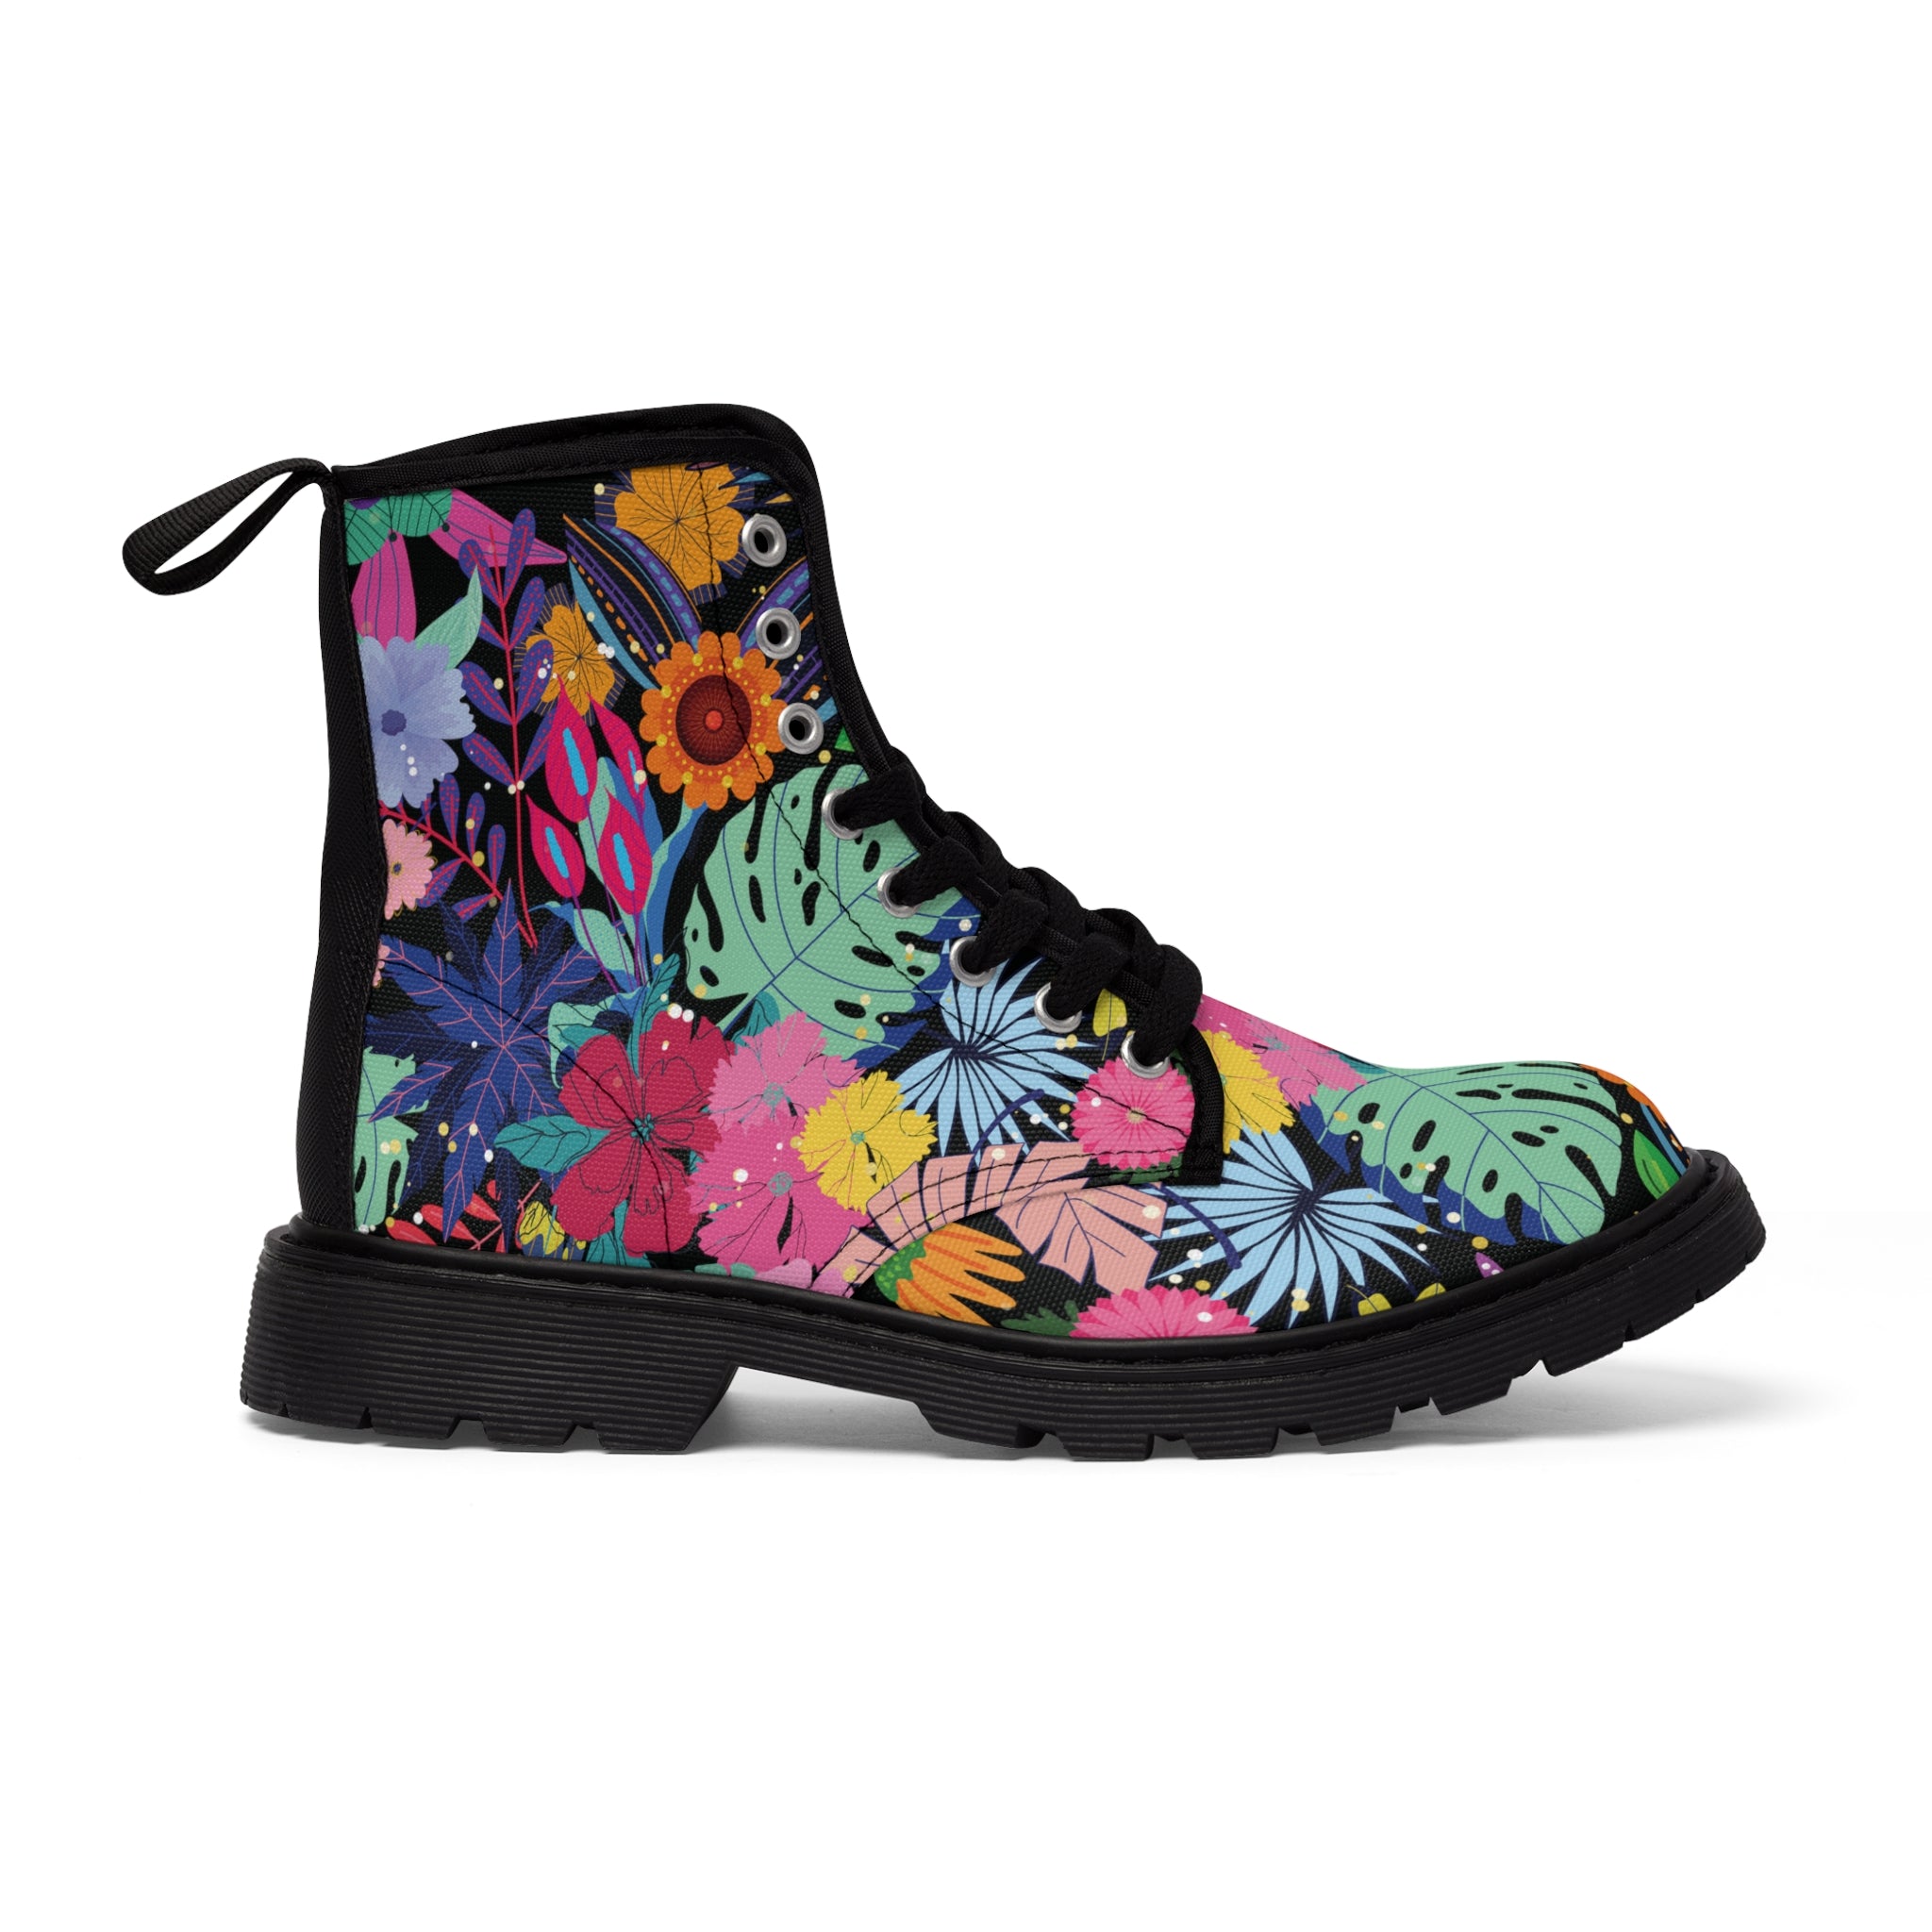 Custom Designer Canvas Lace up Boots for Women with Colorful Floral Prints in Black, Perfect Luxury Gift for Girlfriend